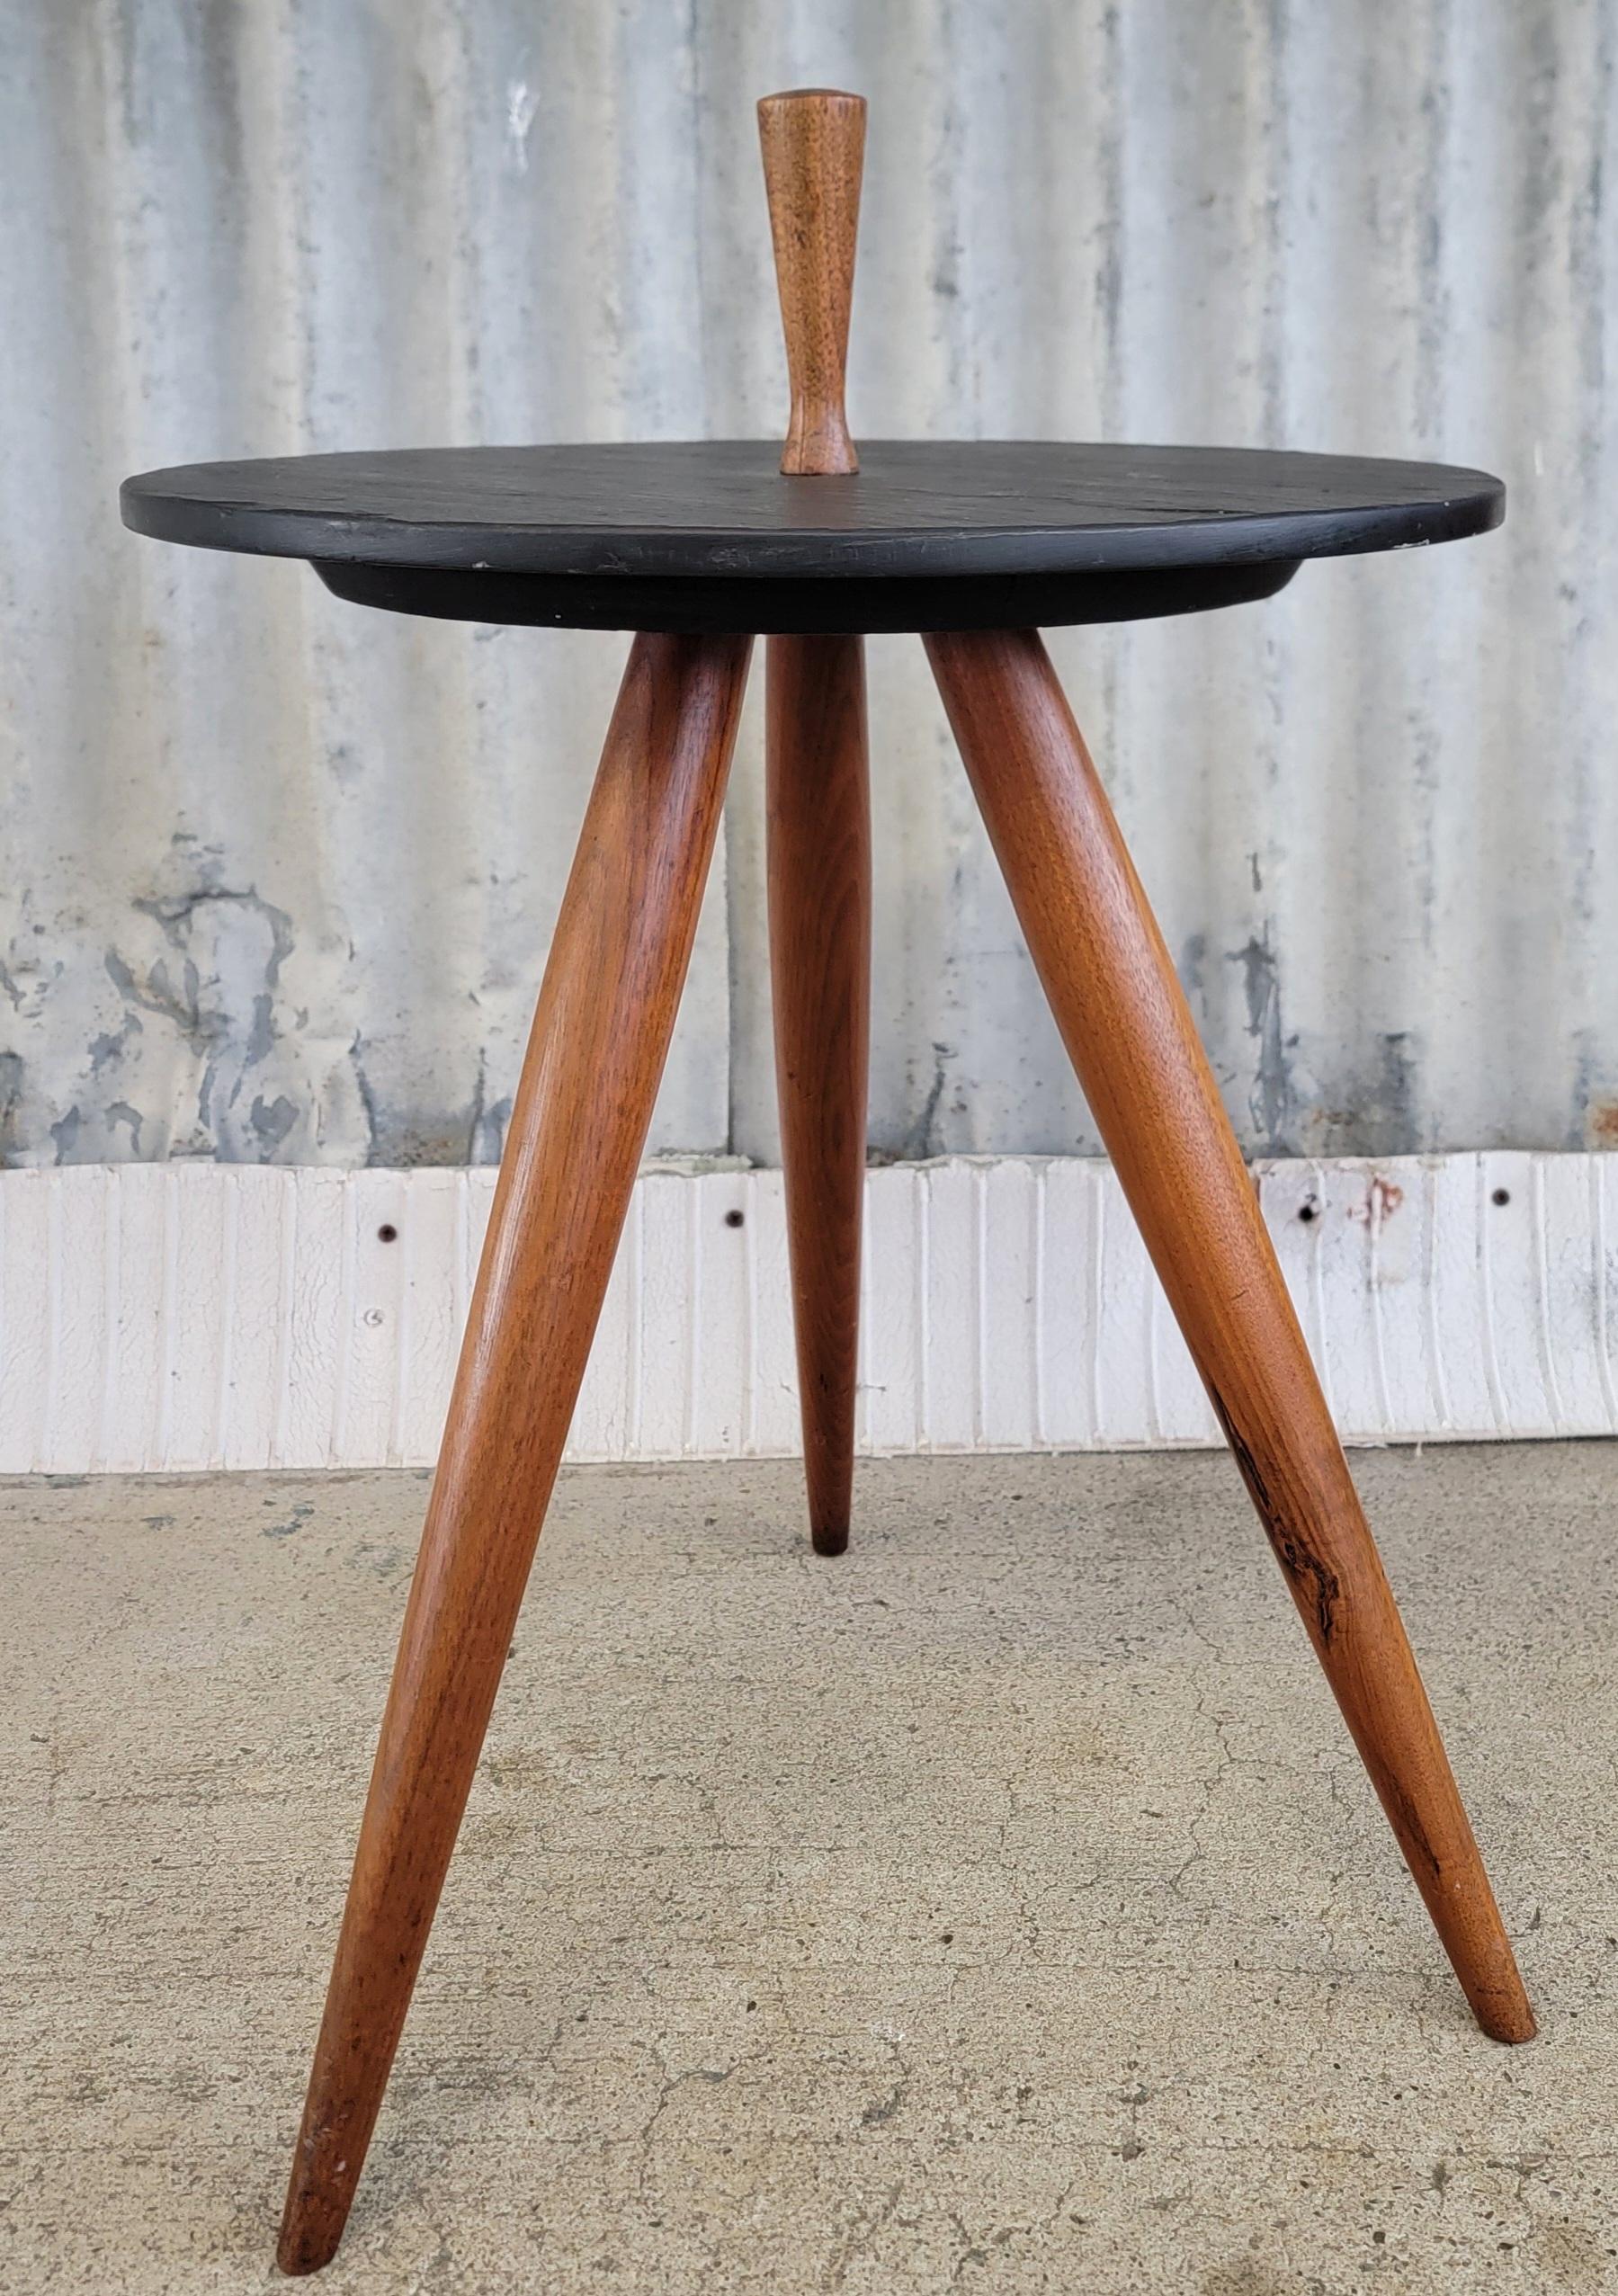 A Mid-Century Modern tripod side table made of slate with solid walnut peg legs and handle. Attributed to Phillip Lloyd Powell as there are no labels to confirm. Fine craftsmanship and materials. Table measures 21.75 inches to top of handle, slate